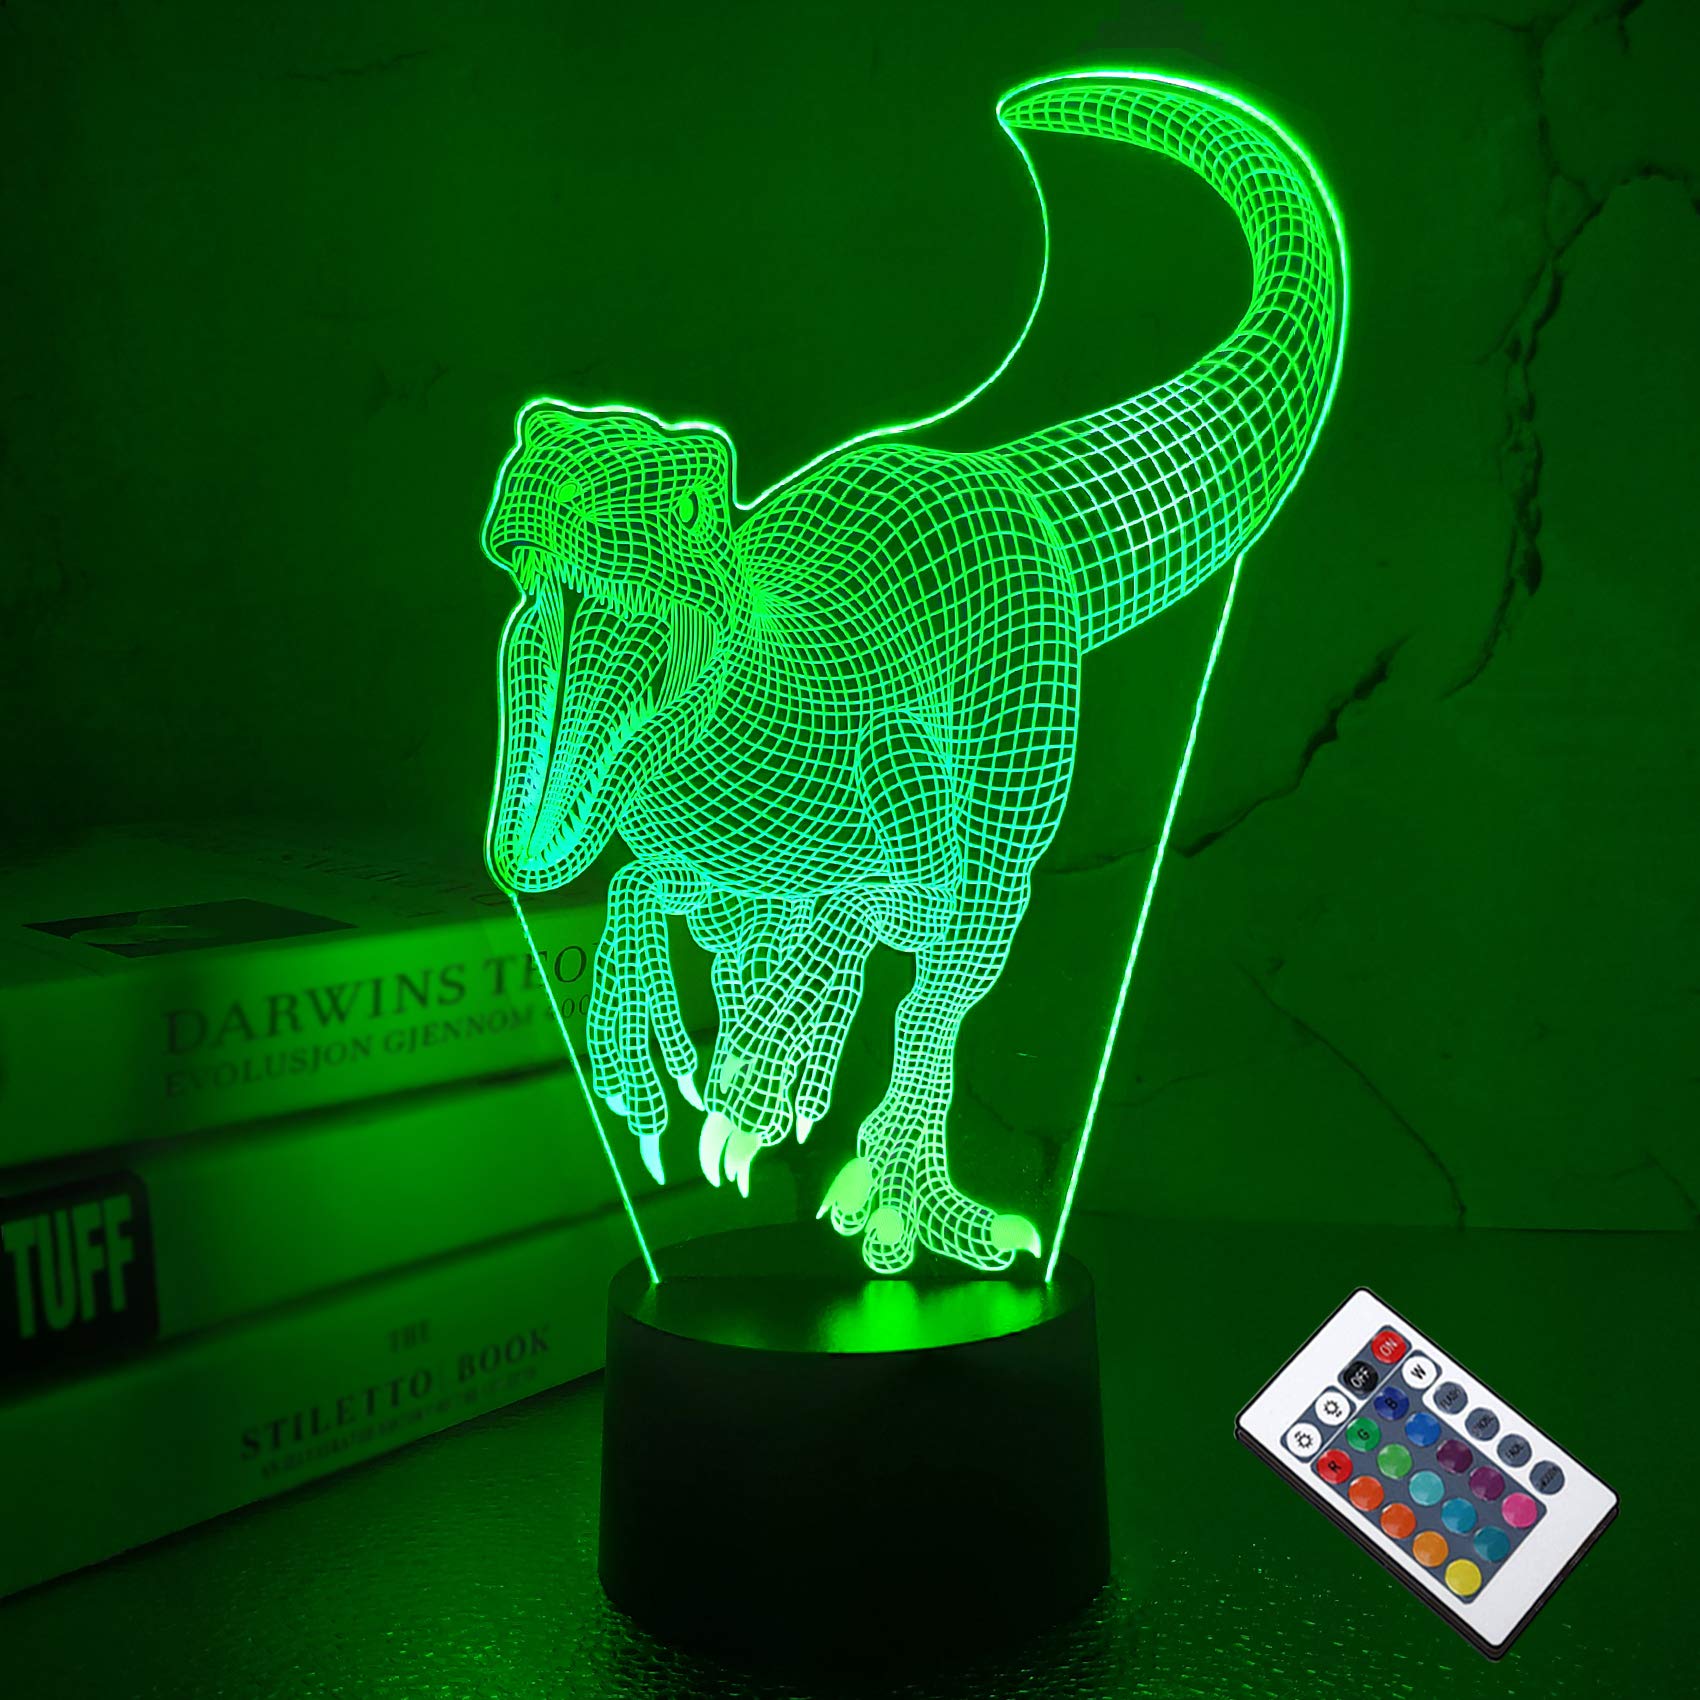 Dinosaur Lamp, CooPark 3D Illusion Night Light for Kids with 16 Colors Changing Remote Control Optical Bedroom Decor Best Creative Birthday Christmas Halloween Gifts for Boy Toddler